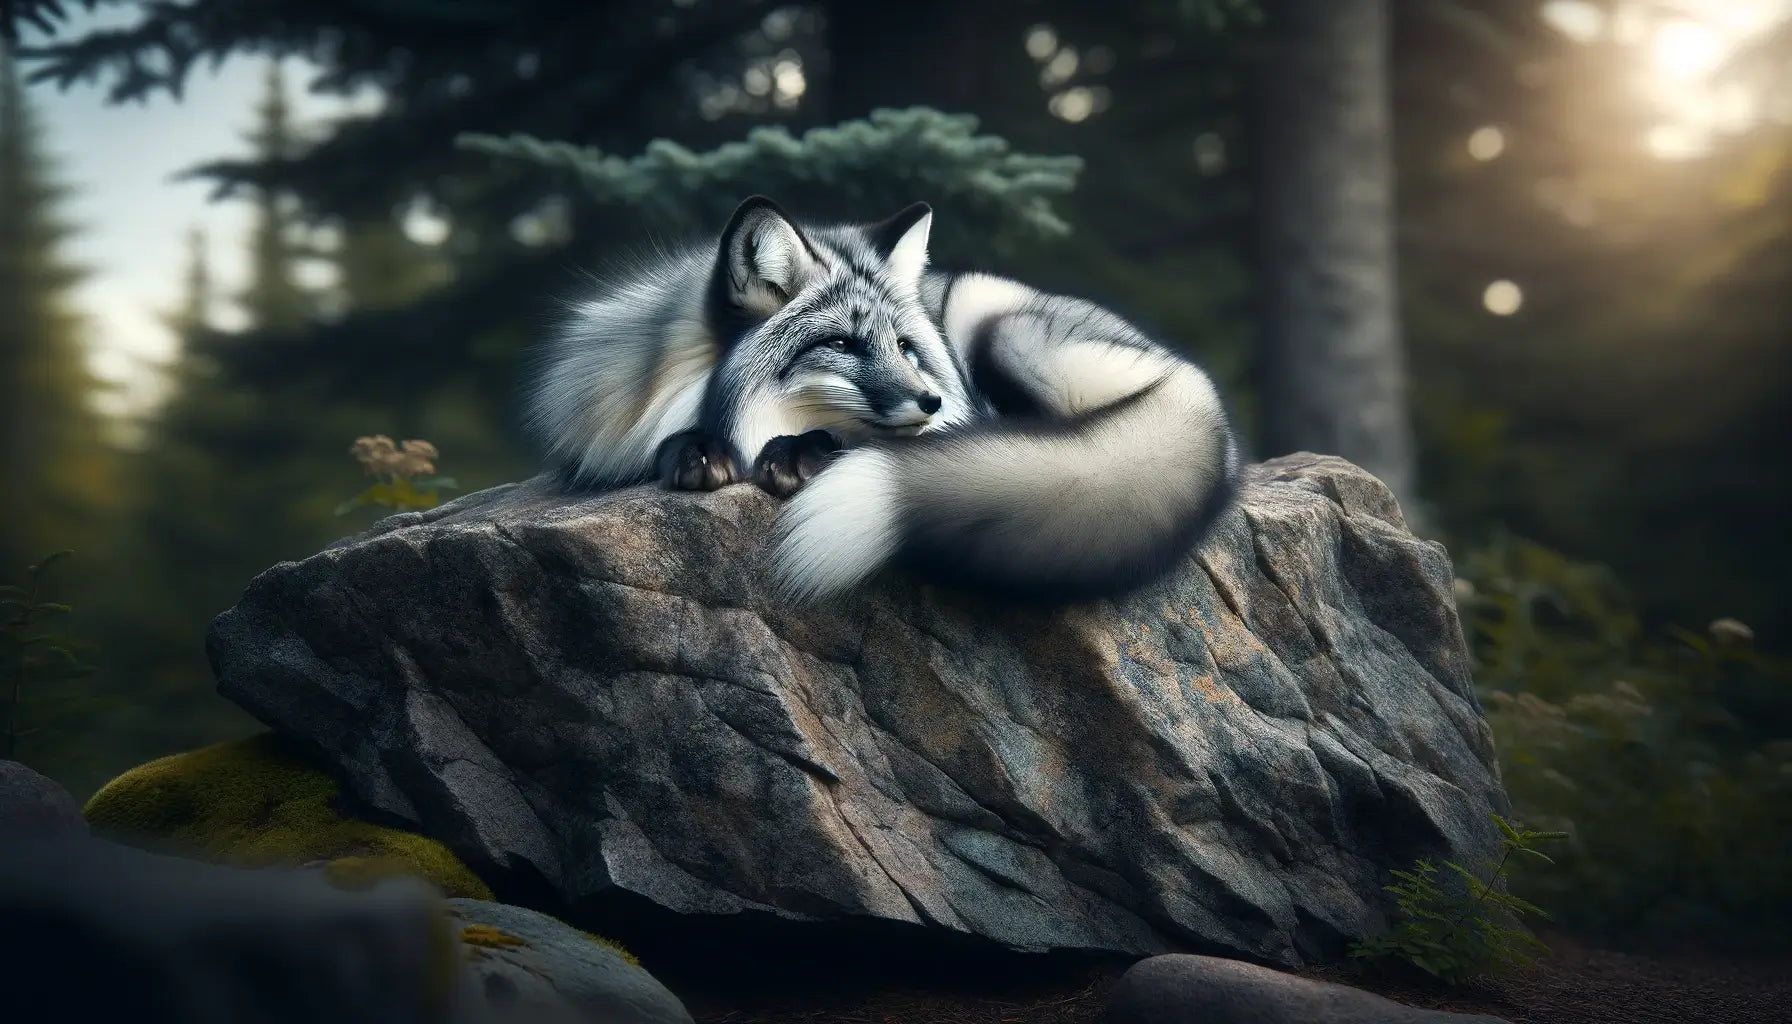 A Canadian Marble Fox relaxing on a large rock, showcasing its luxurious coat with a blend of grey and white fur, reflecting its marble-like appearance.